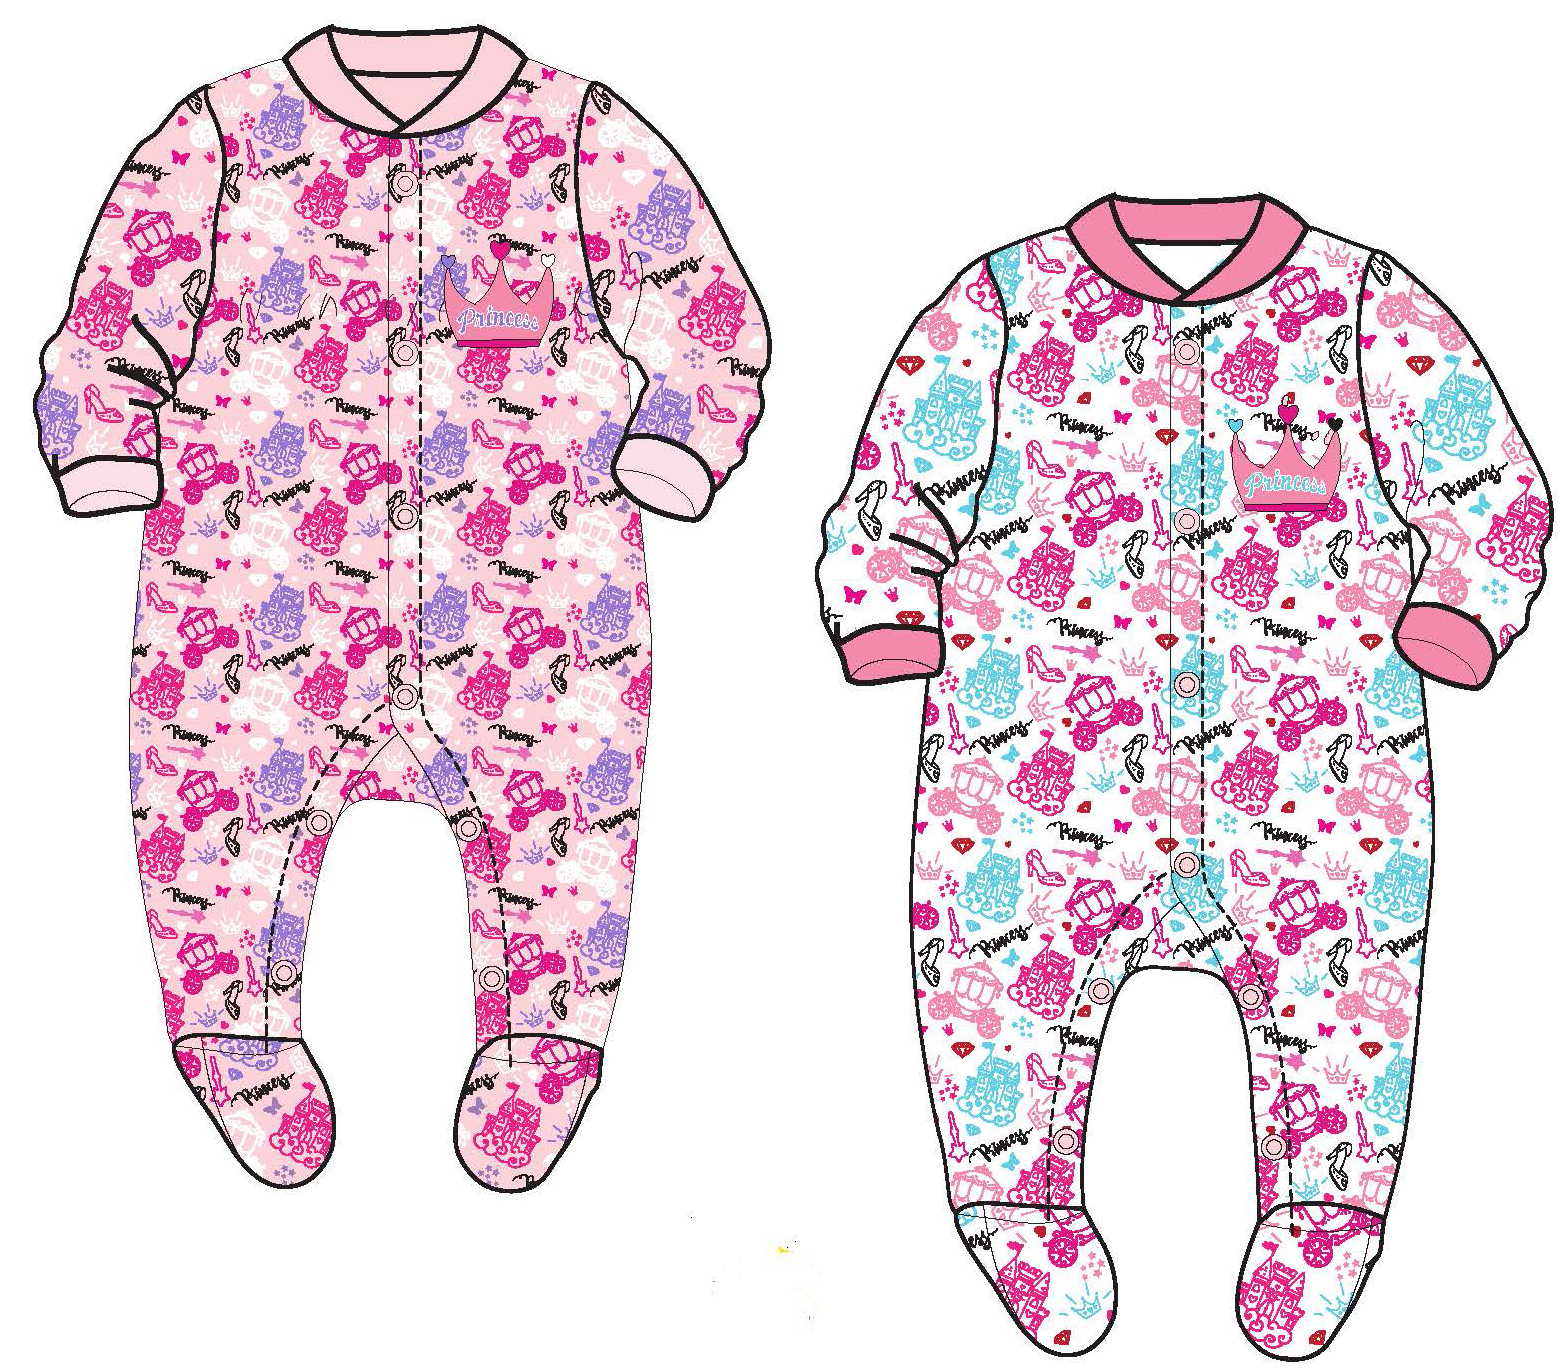 Baby Girl's Knit One-Piece Footed PAJAMAS w/ Little Royal Princess Print - Sizes 0/3M-9M